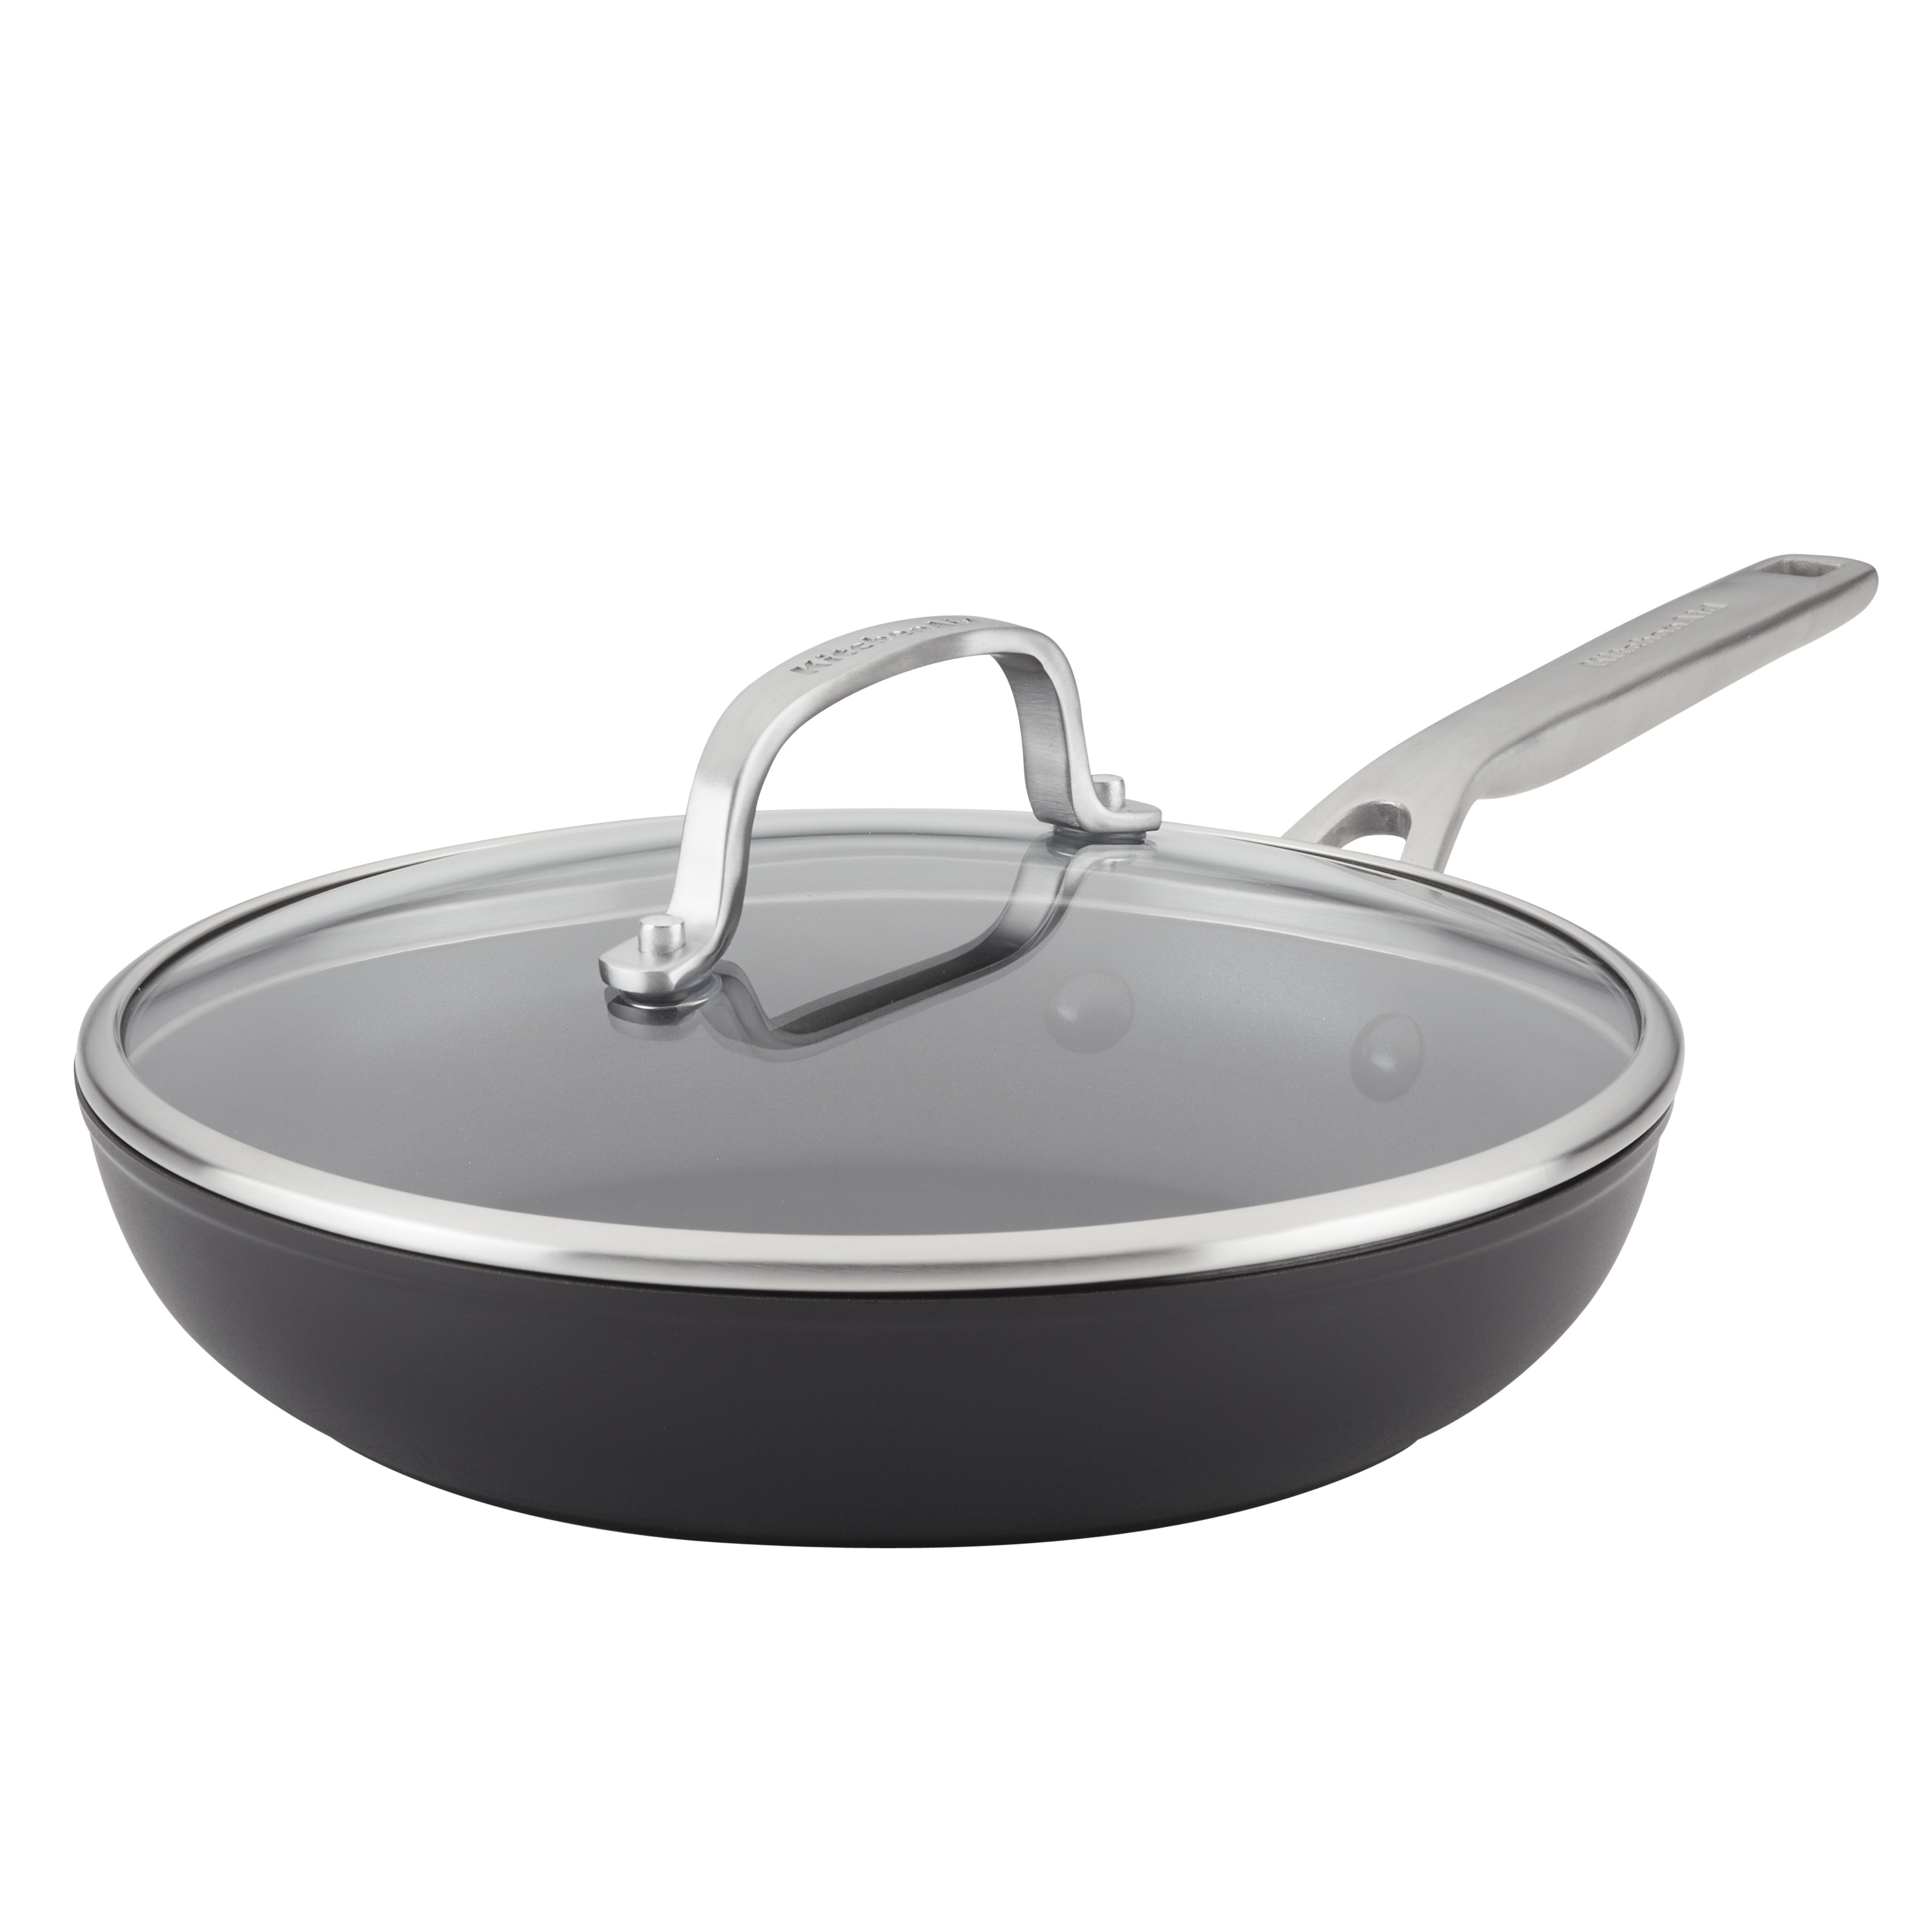 https://ak1.ostkcdn.com/images/products/is/images/direct/75600803dd8ba2b81fc6e938bd056be0f9f85bc7/KitchenAid-Hard-Anodized-Induction-Frying-Pan-with-Lid%2C-10-Inch%2C-Matte-Black.jpg